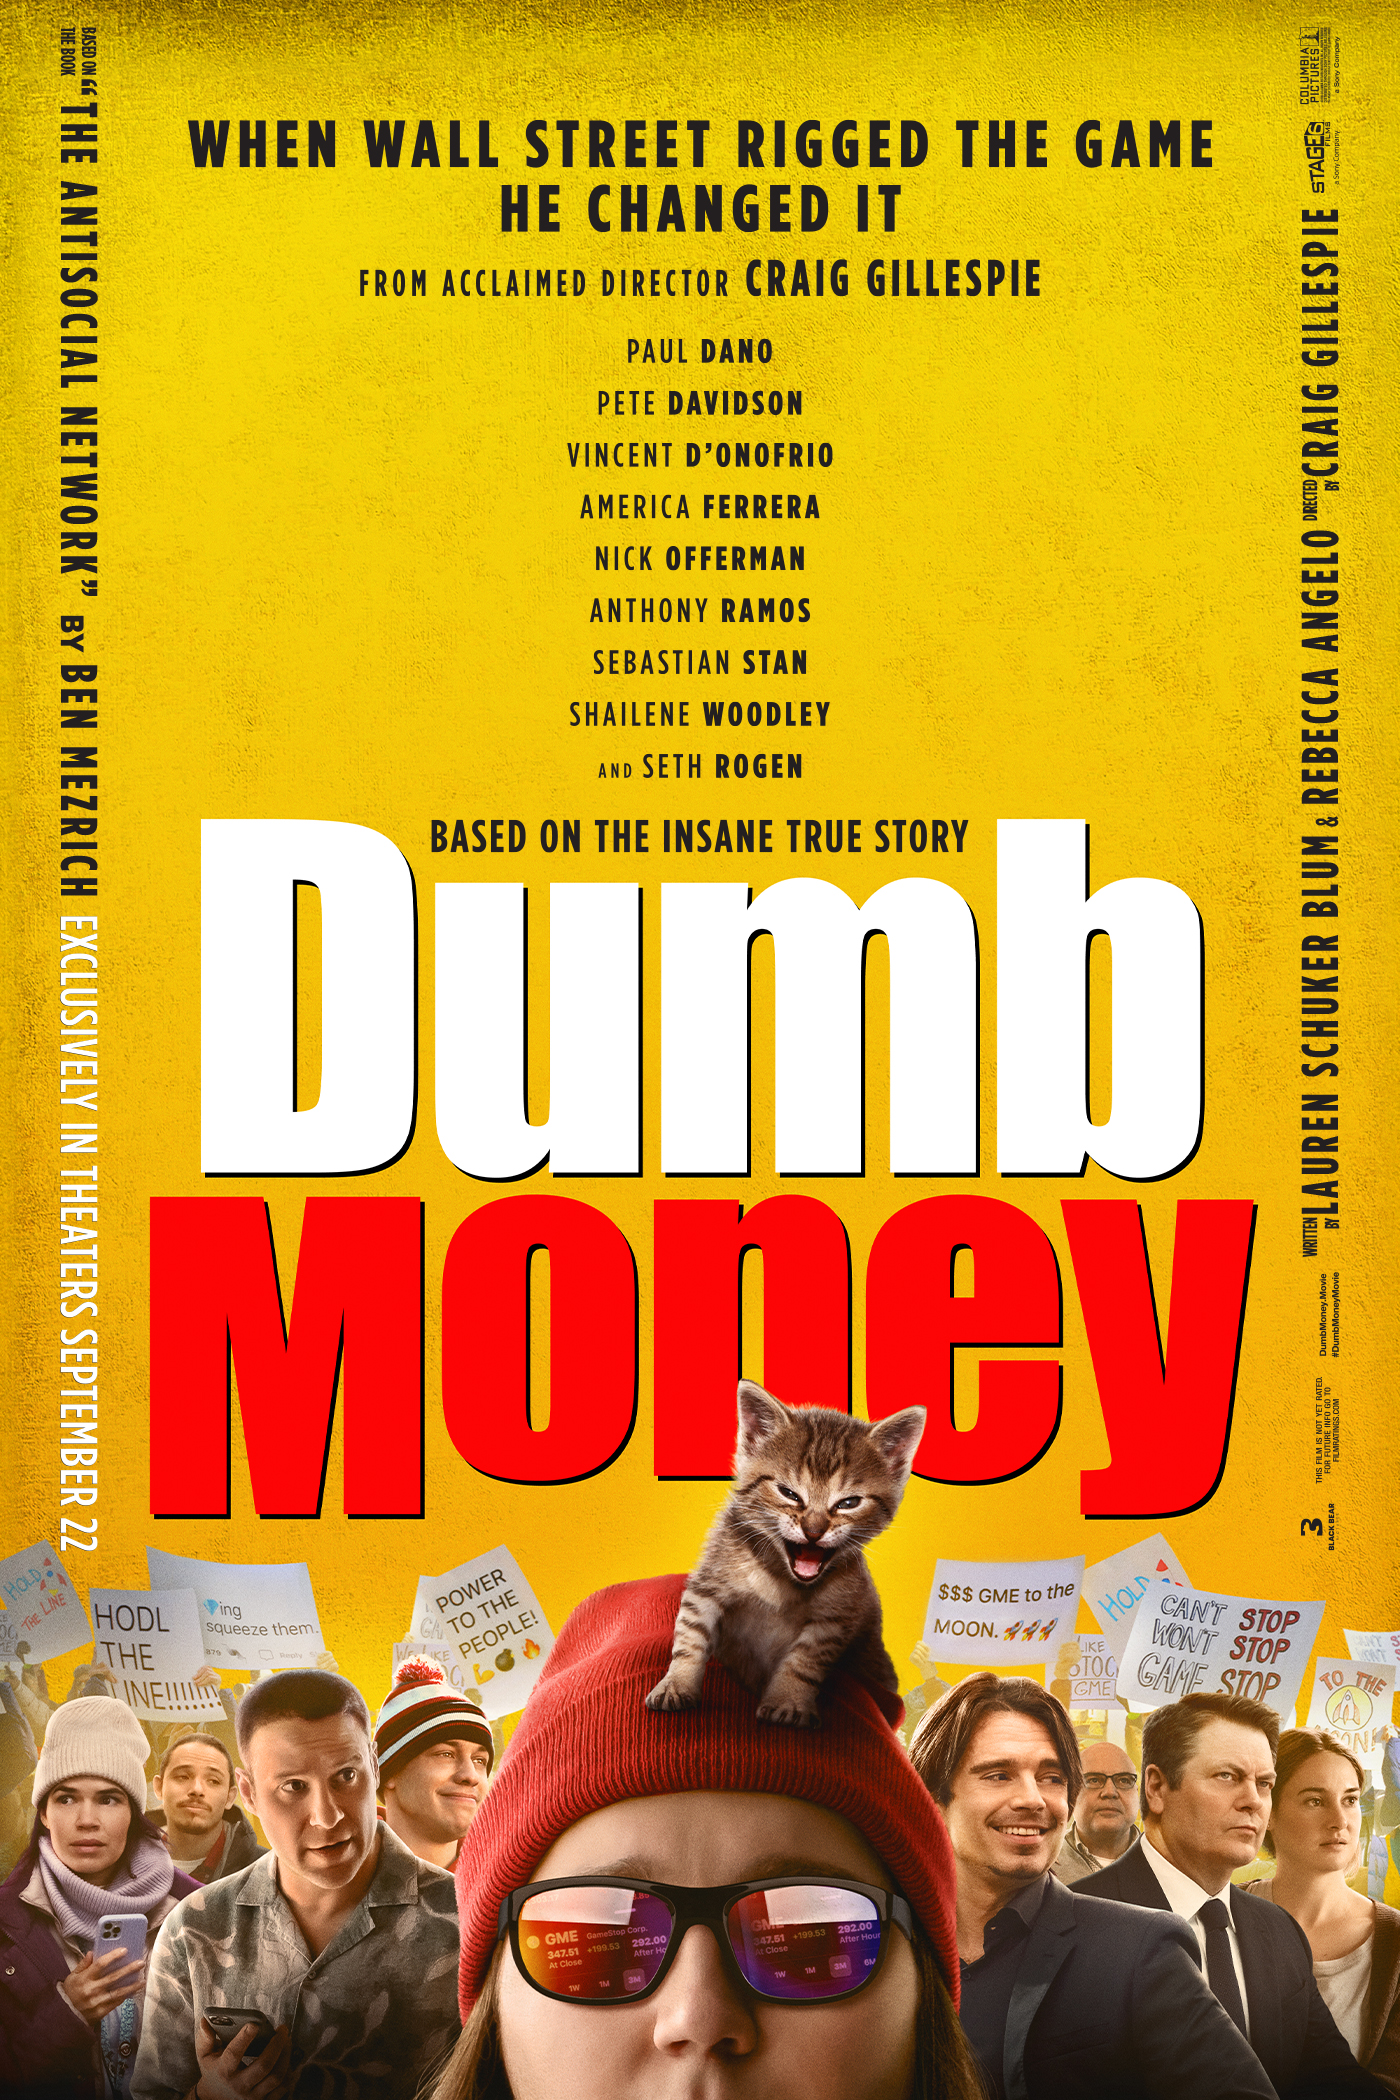 Yellow background with "Dumb Money" in text in the middle. On the bottom shows a line of people with protest signs in the background. In the middle is Paul Dano with sunglasses, a beanie, and a small kitten on his head.